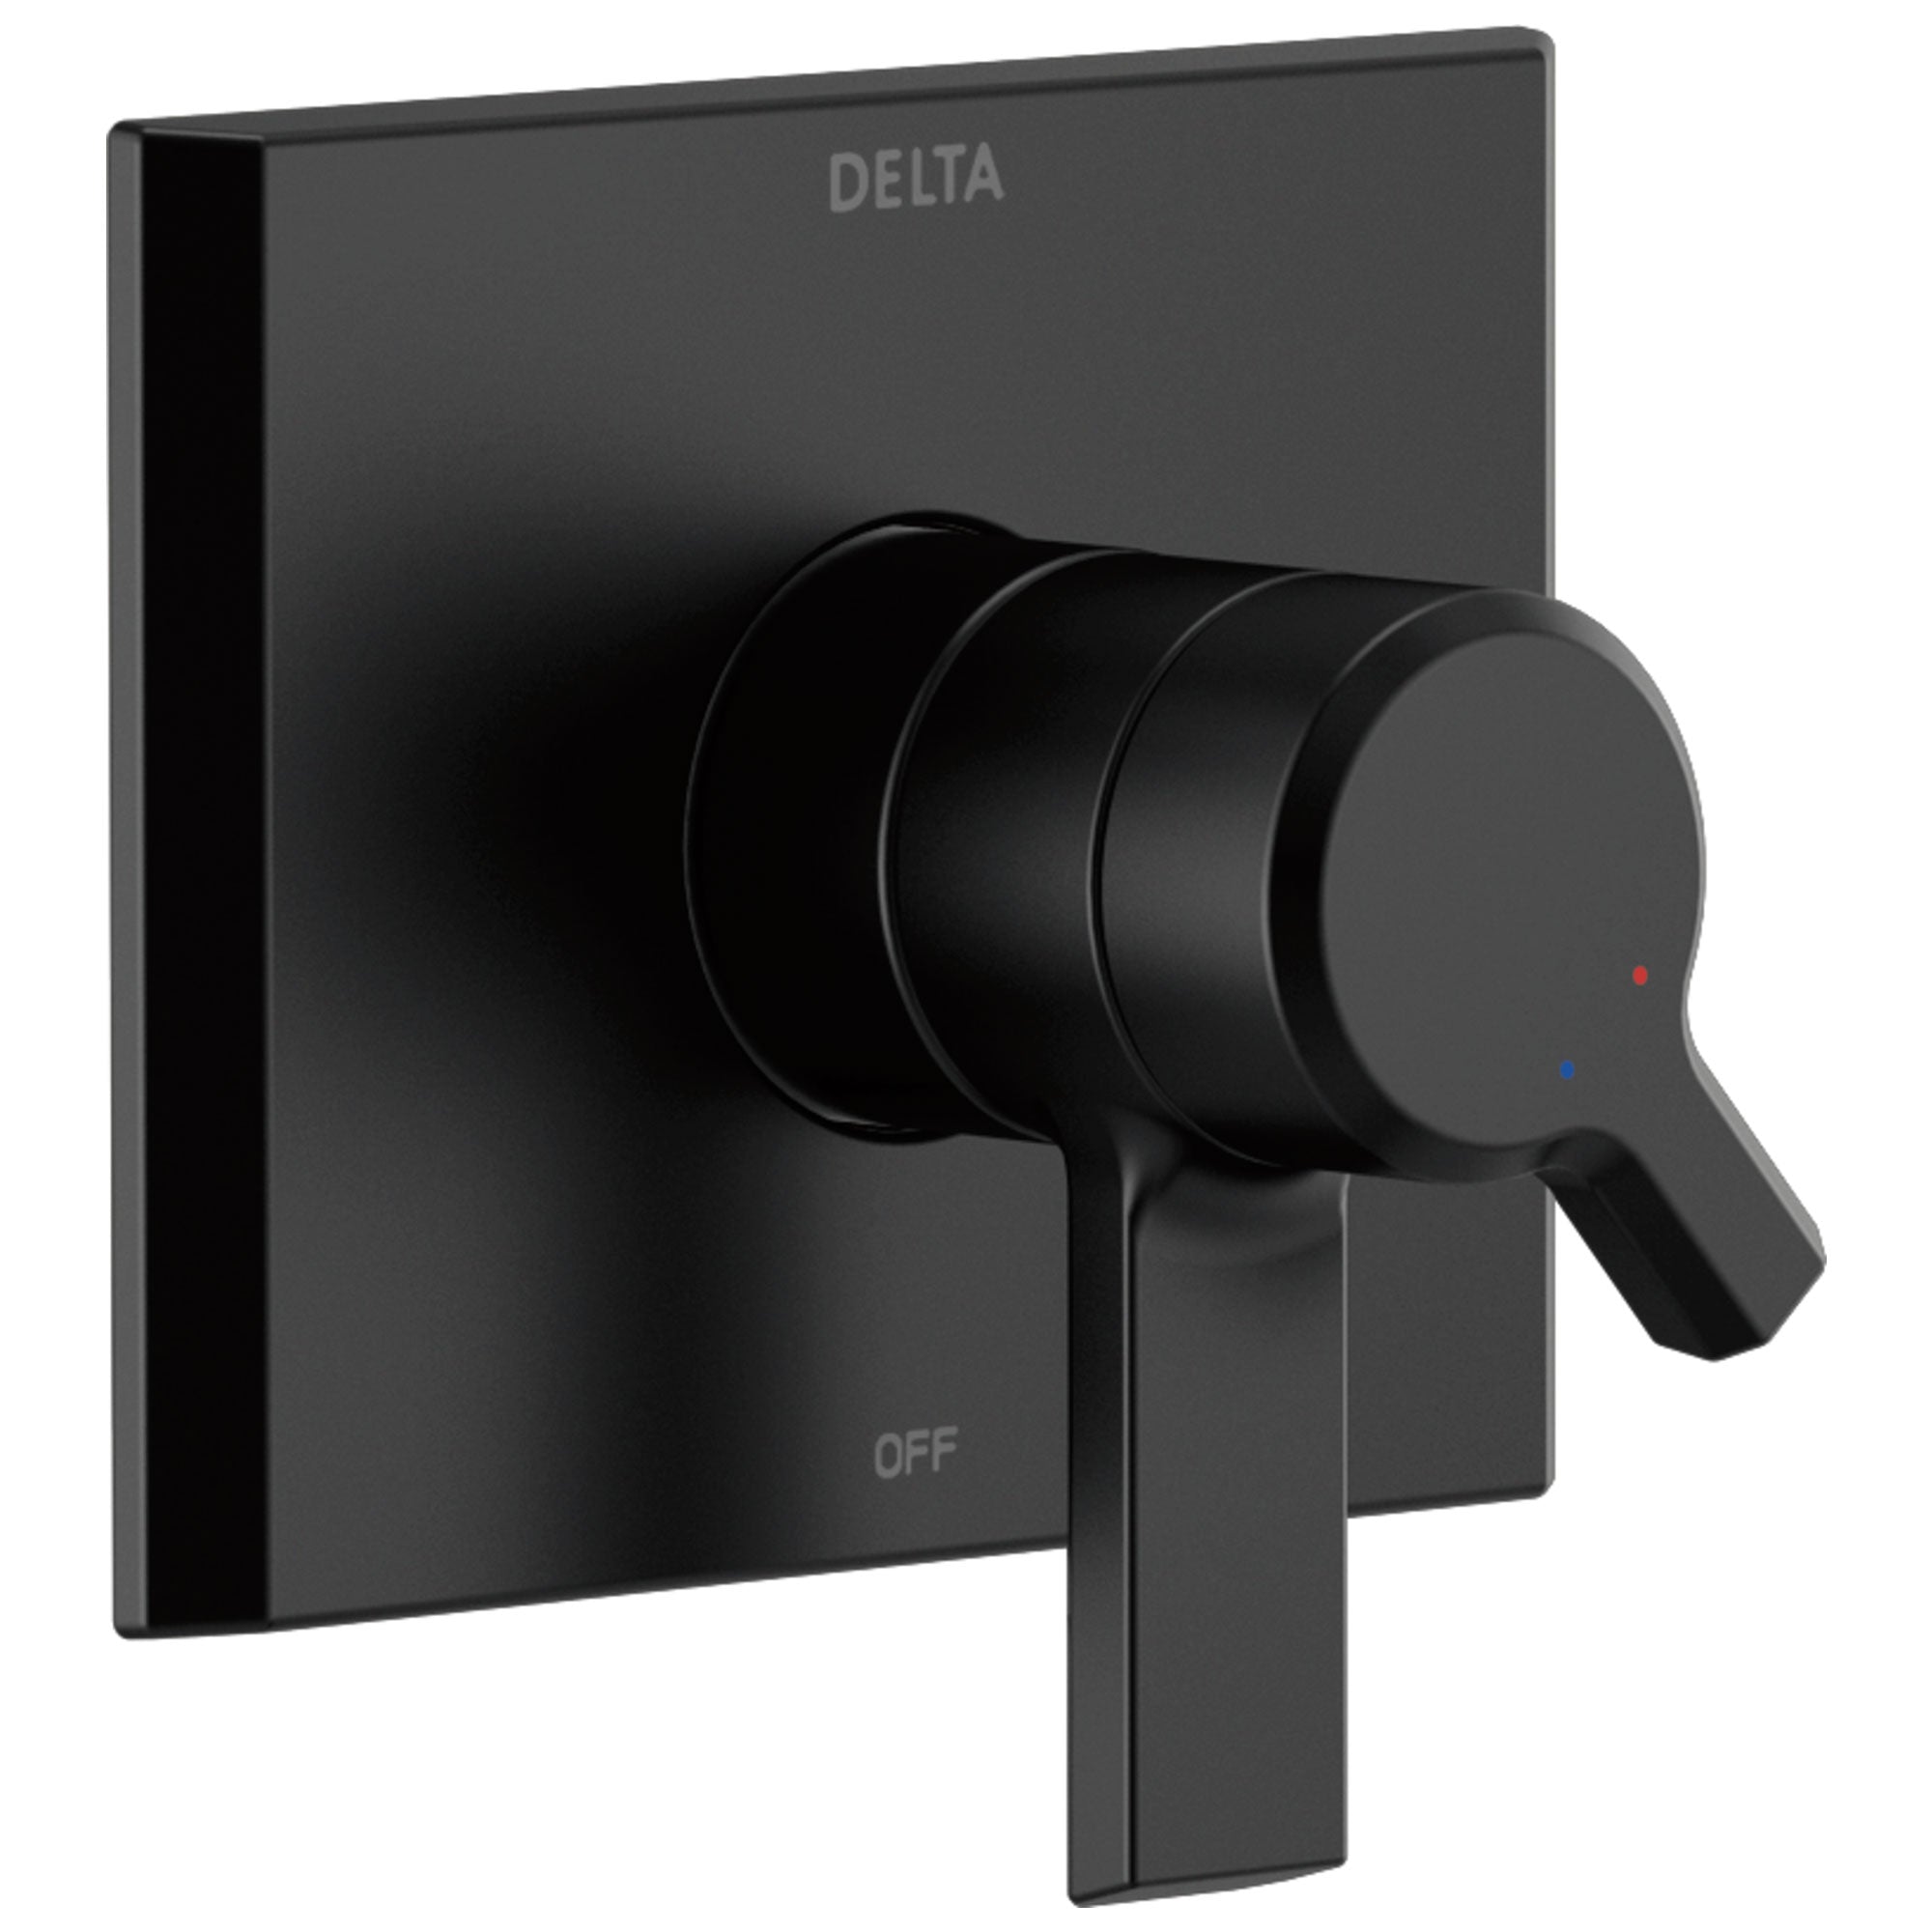 Delta Pivotal Modern Matte Black Finish Monitor 17 Series Shower Faucet Control Includes Handles, Cartridge, and Valve with Stops D3396V